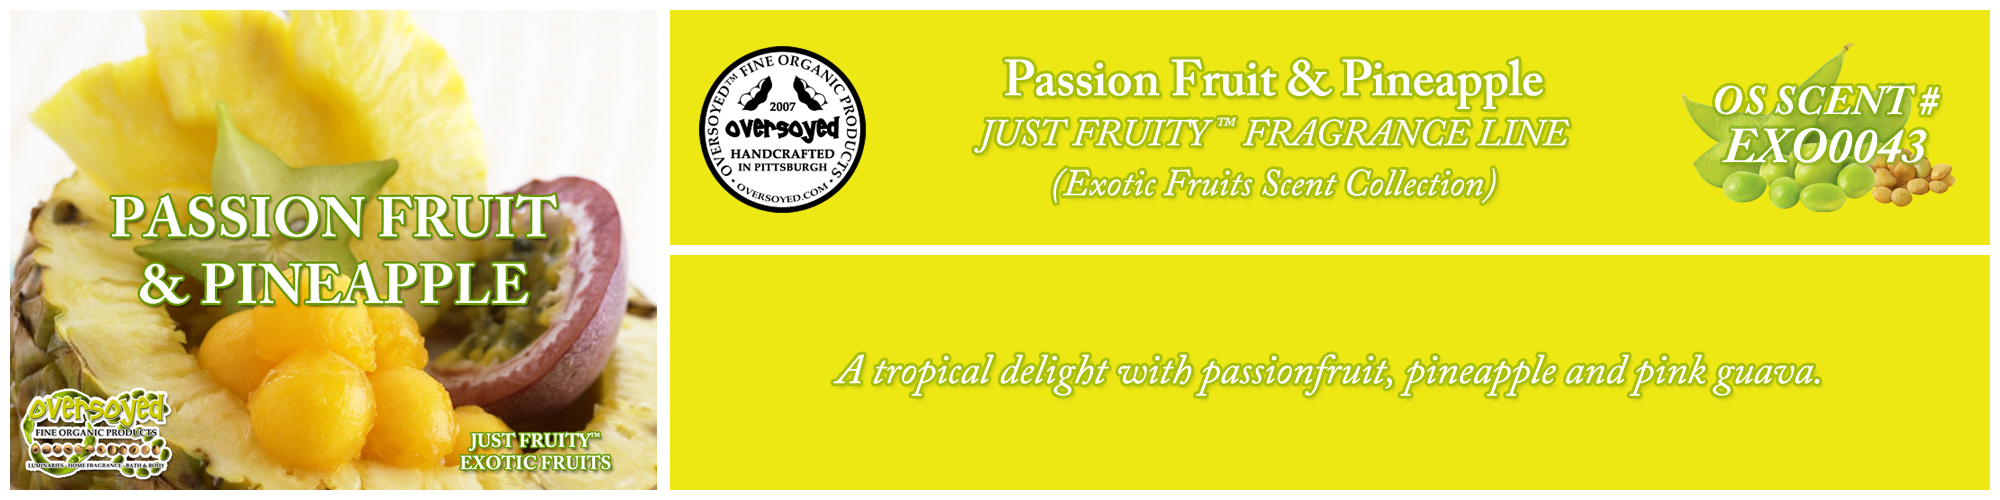 Passion Fruit & Pineapple Handcrafted Products Collection